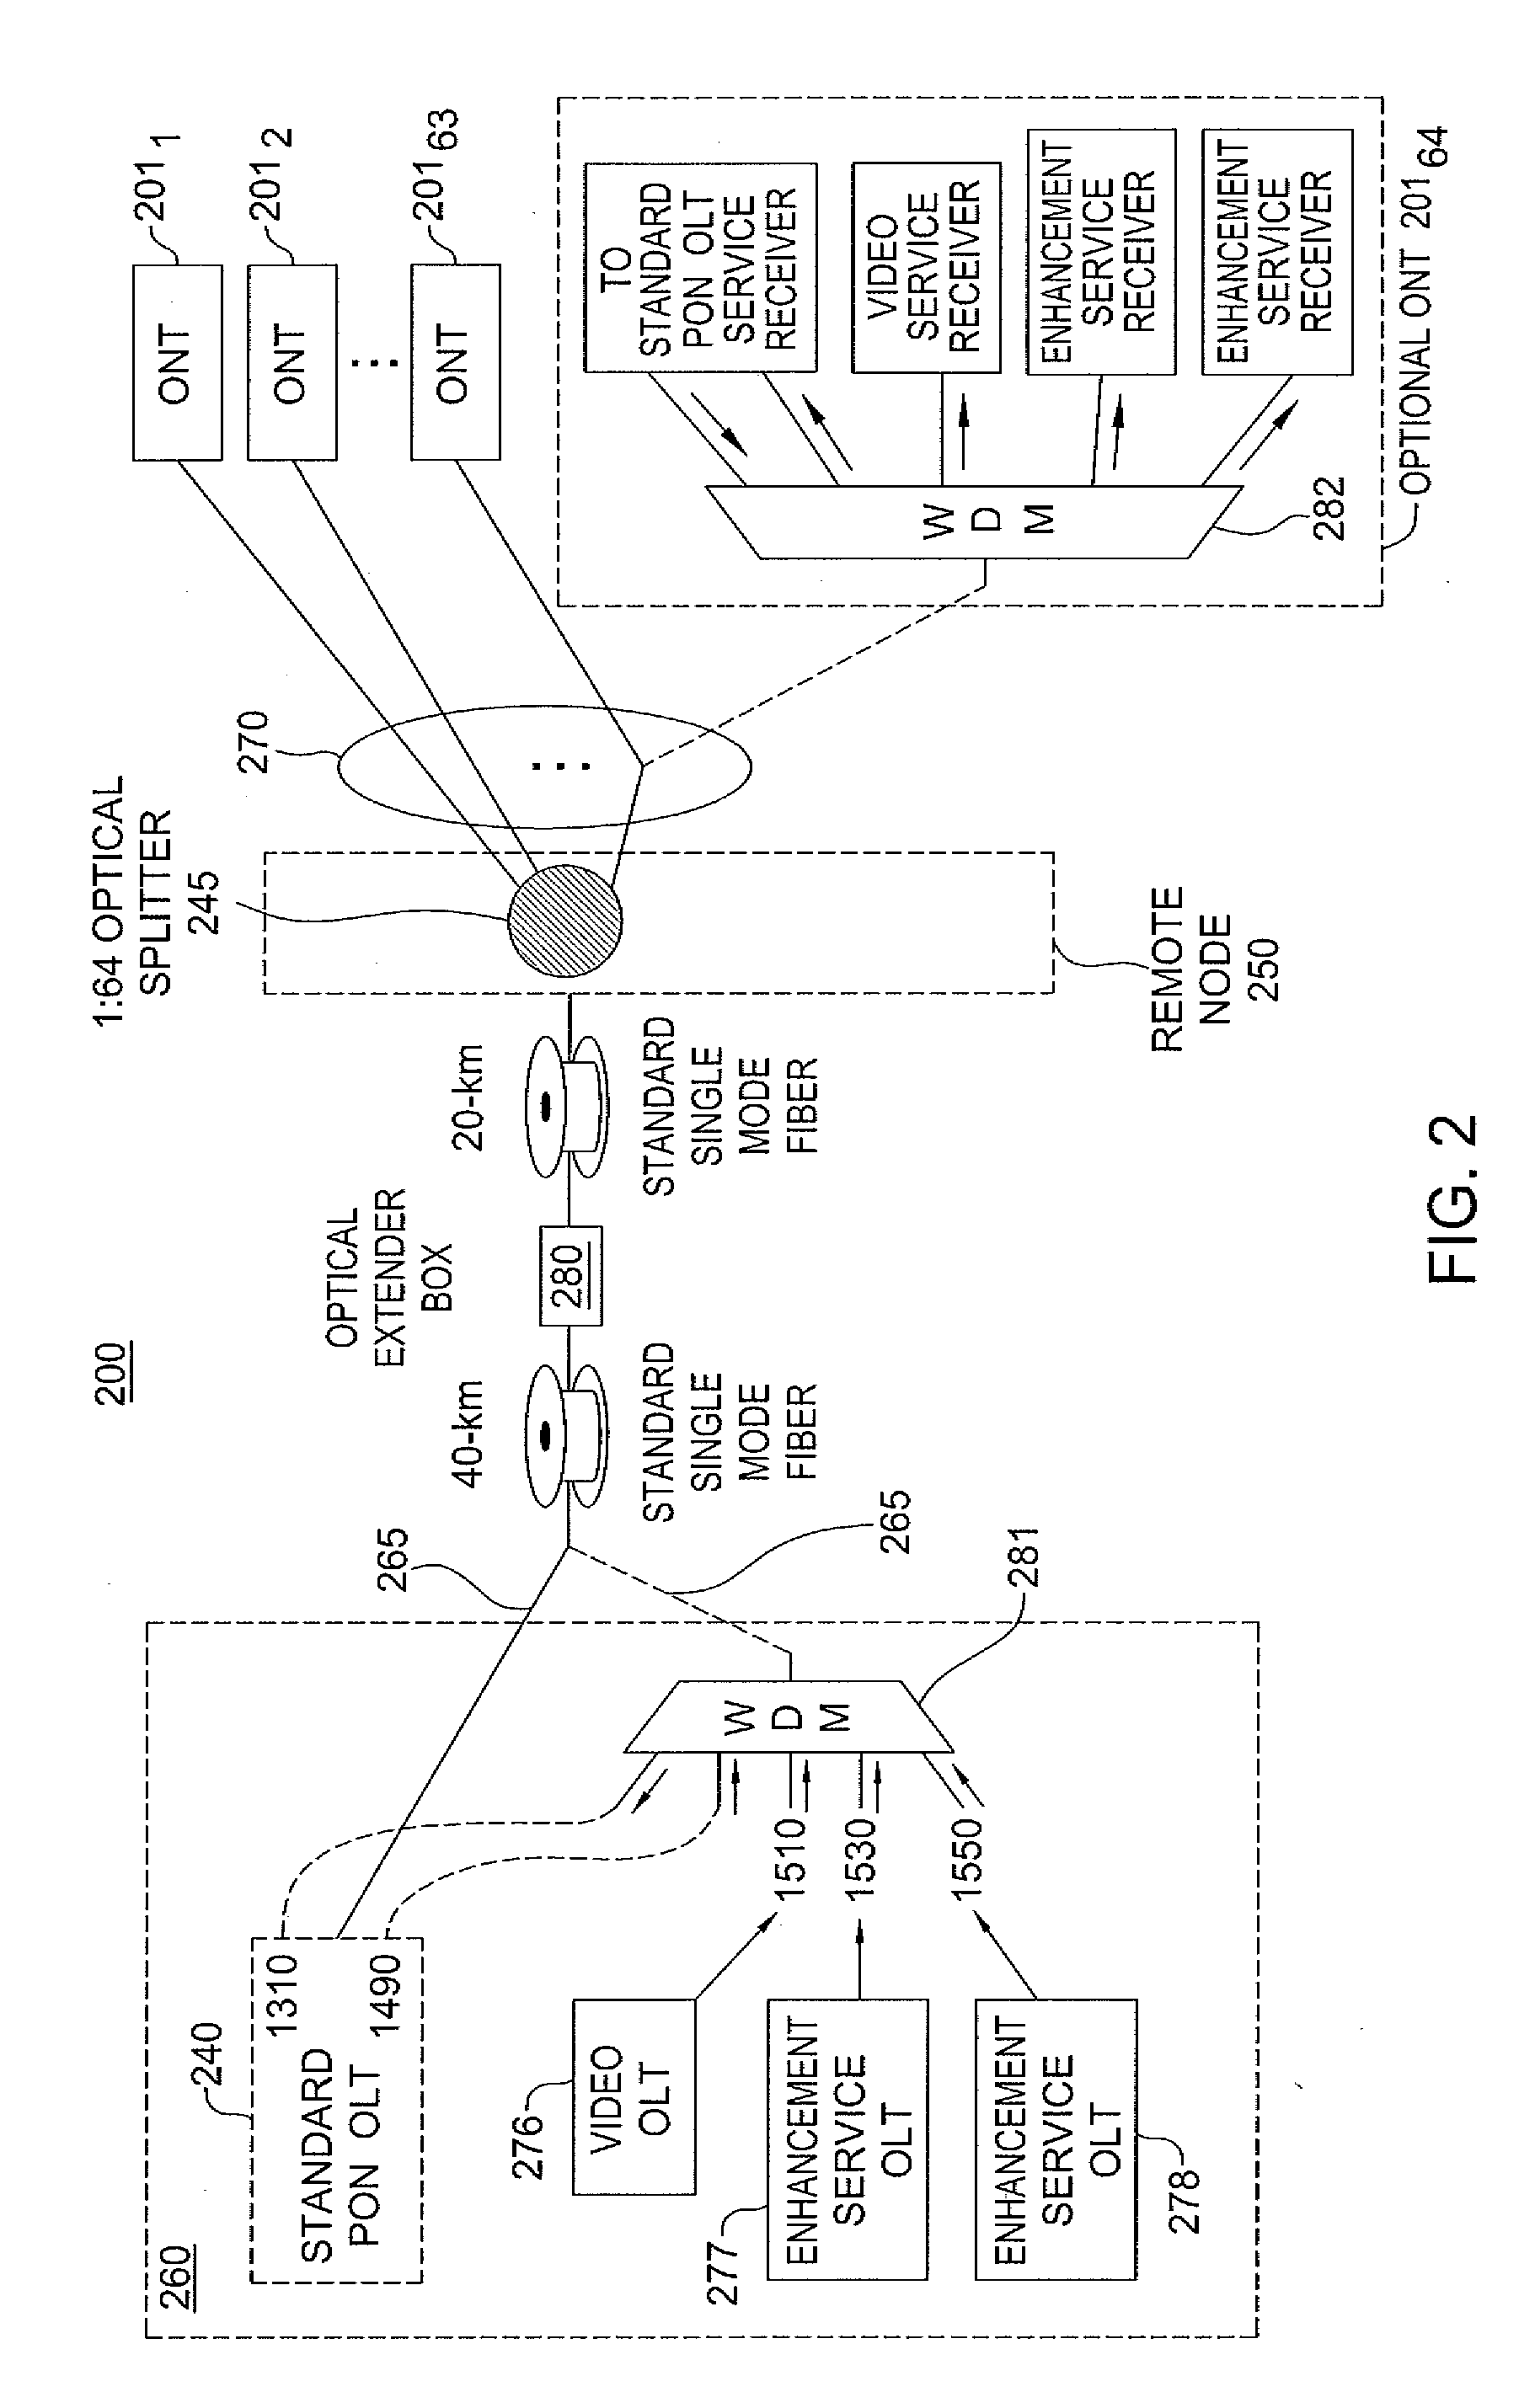 Method and apparatus for enabling multiple optical line termination devices to share a feeder fiber